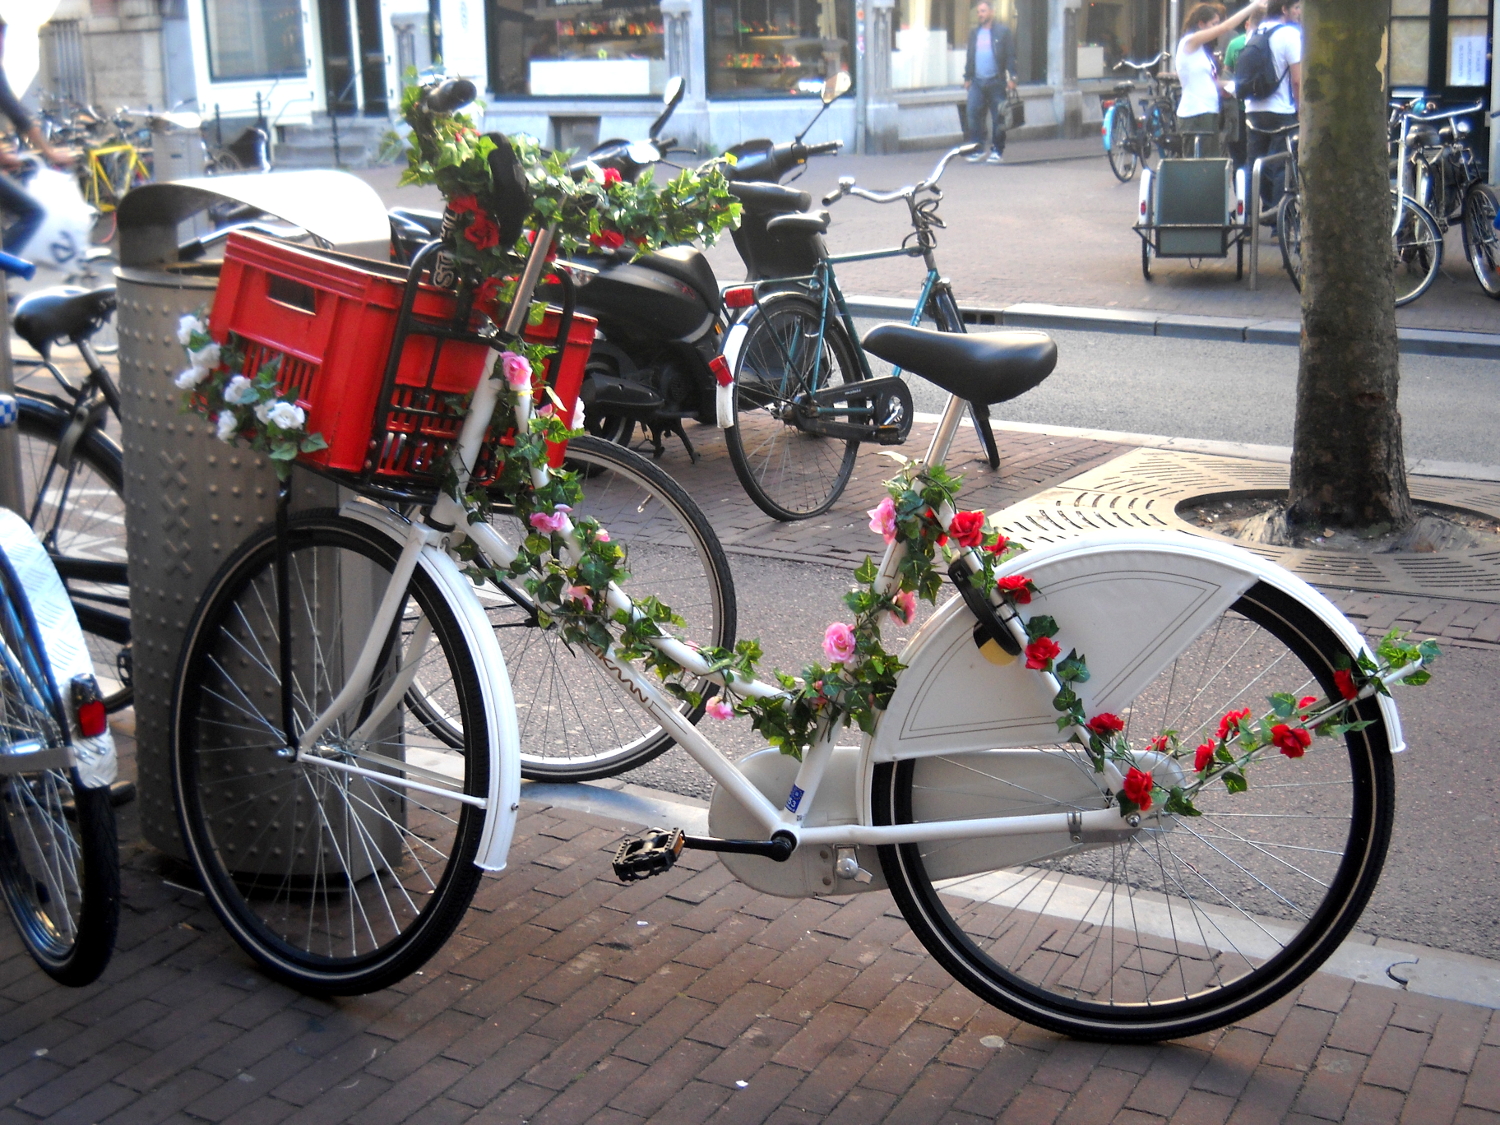 Beautiful Bicycles with flowers in Amsterdam